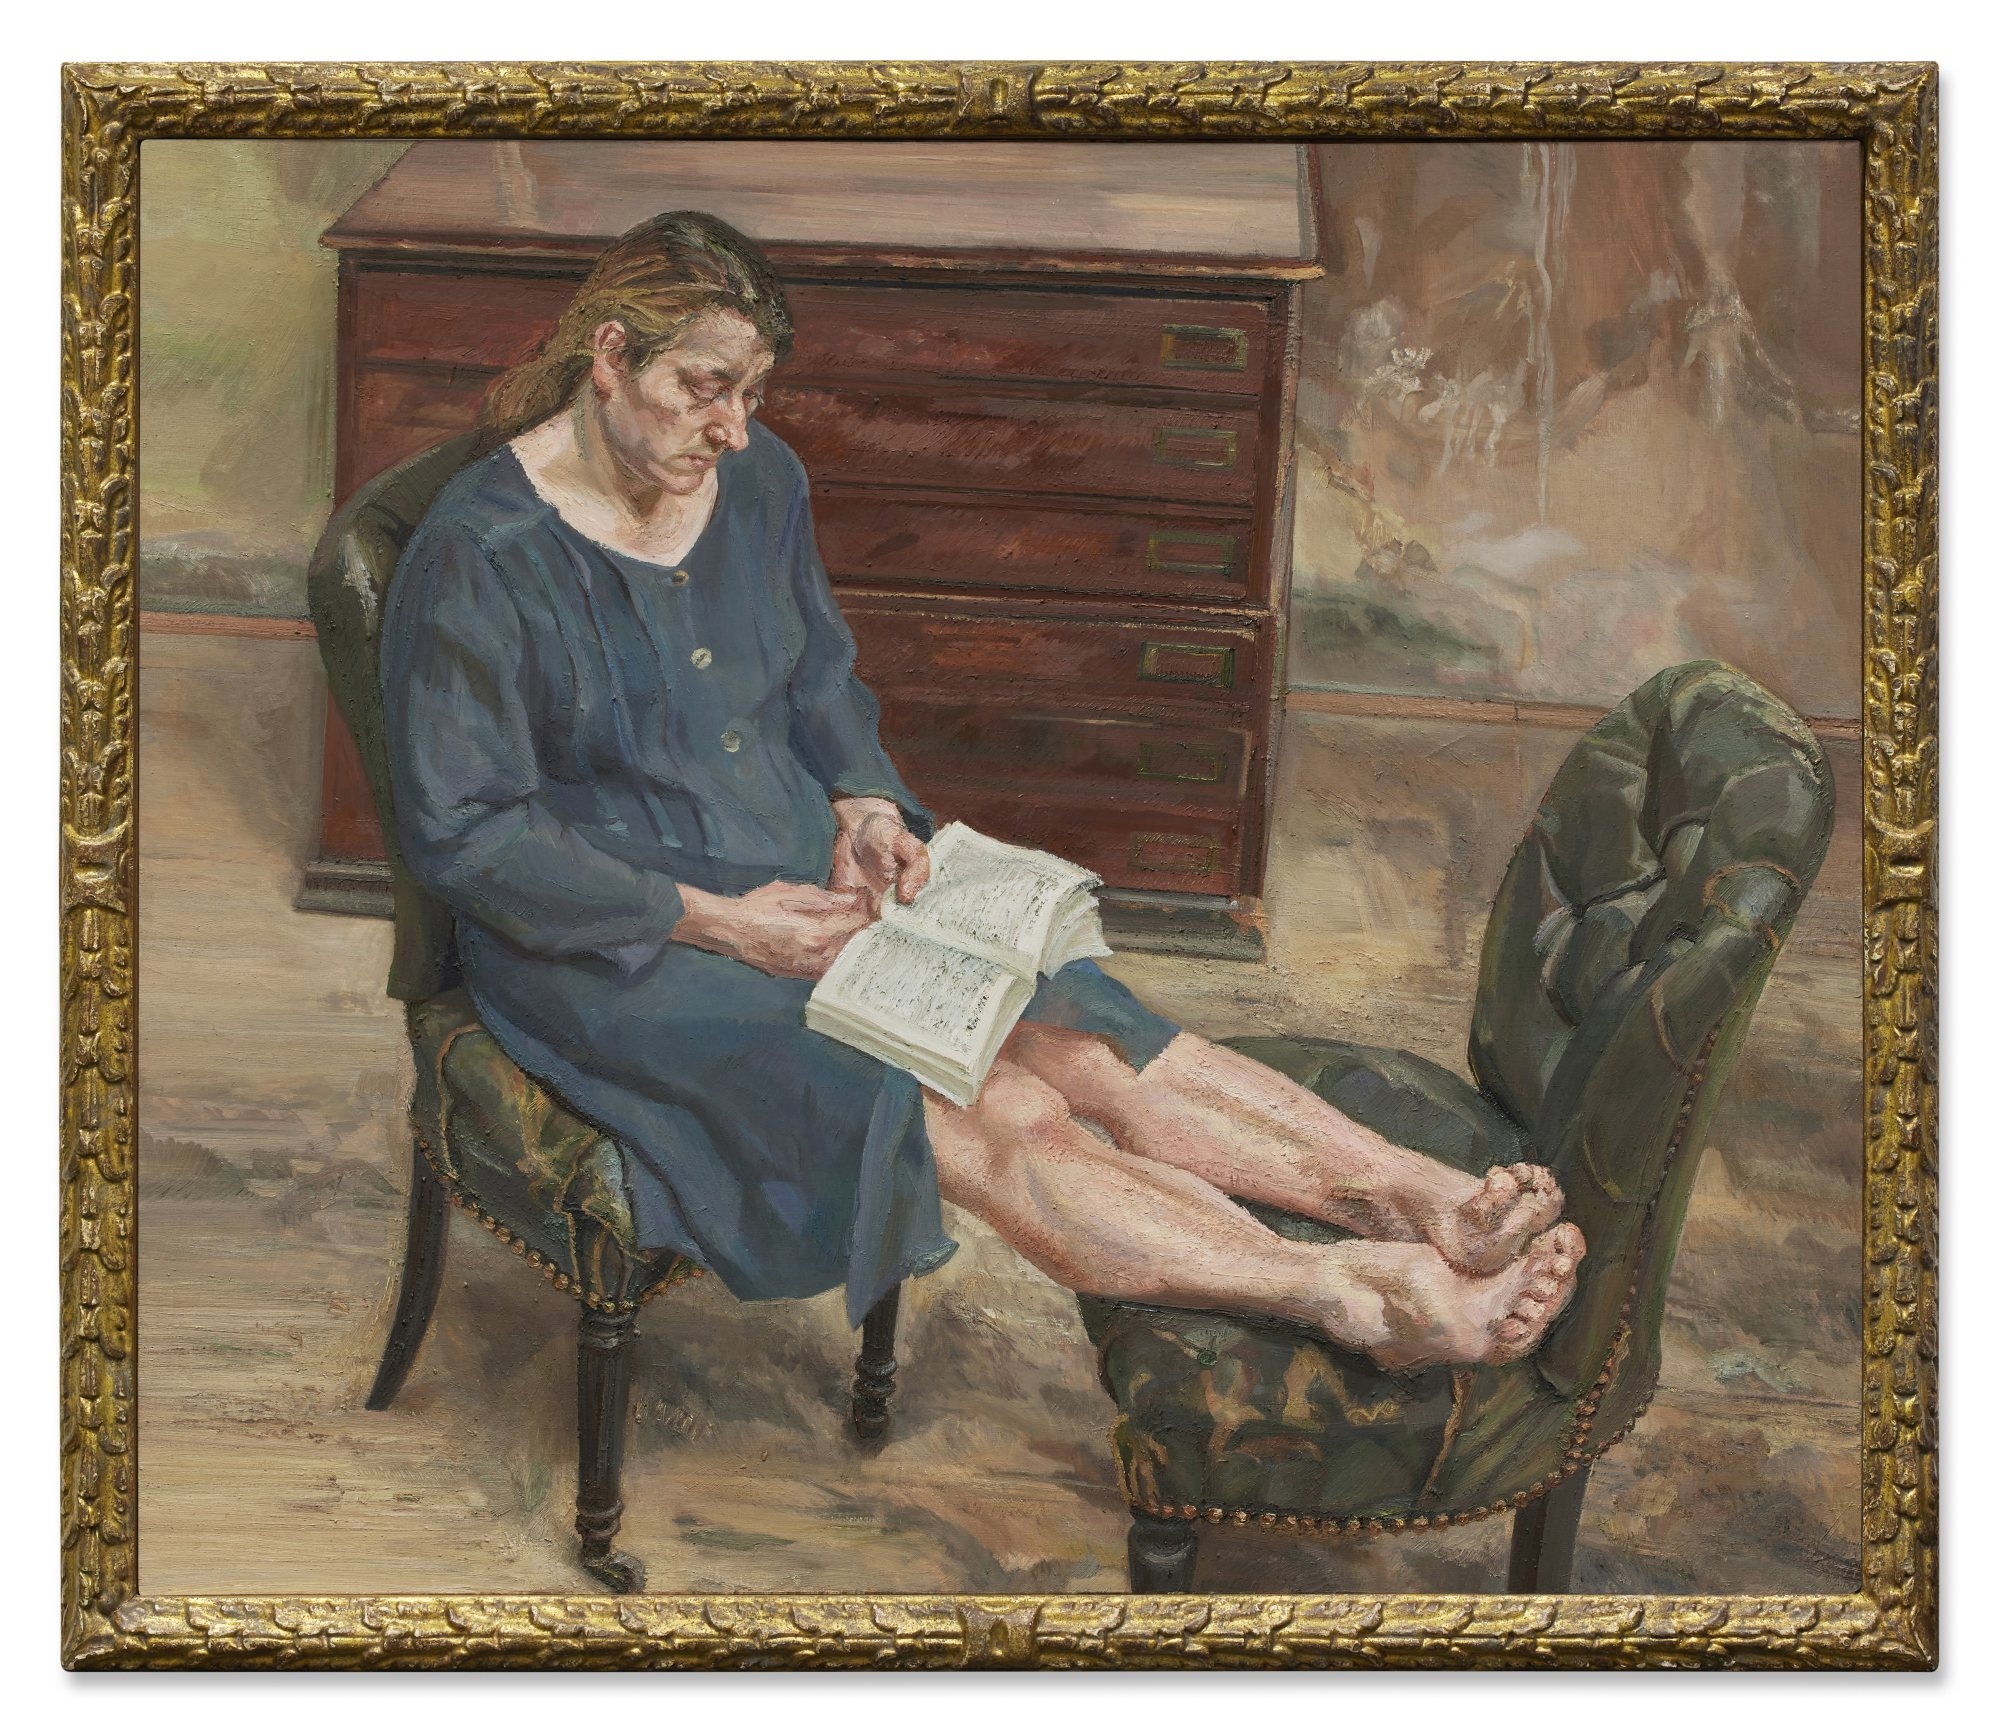 Ib Reading by Lucian Freud, Executed in 1997